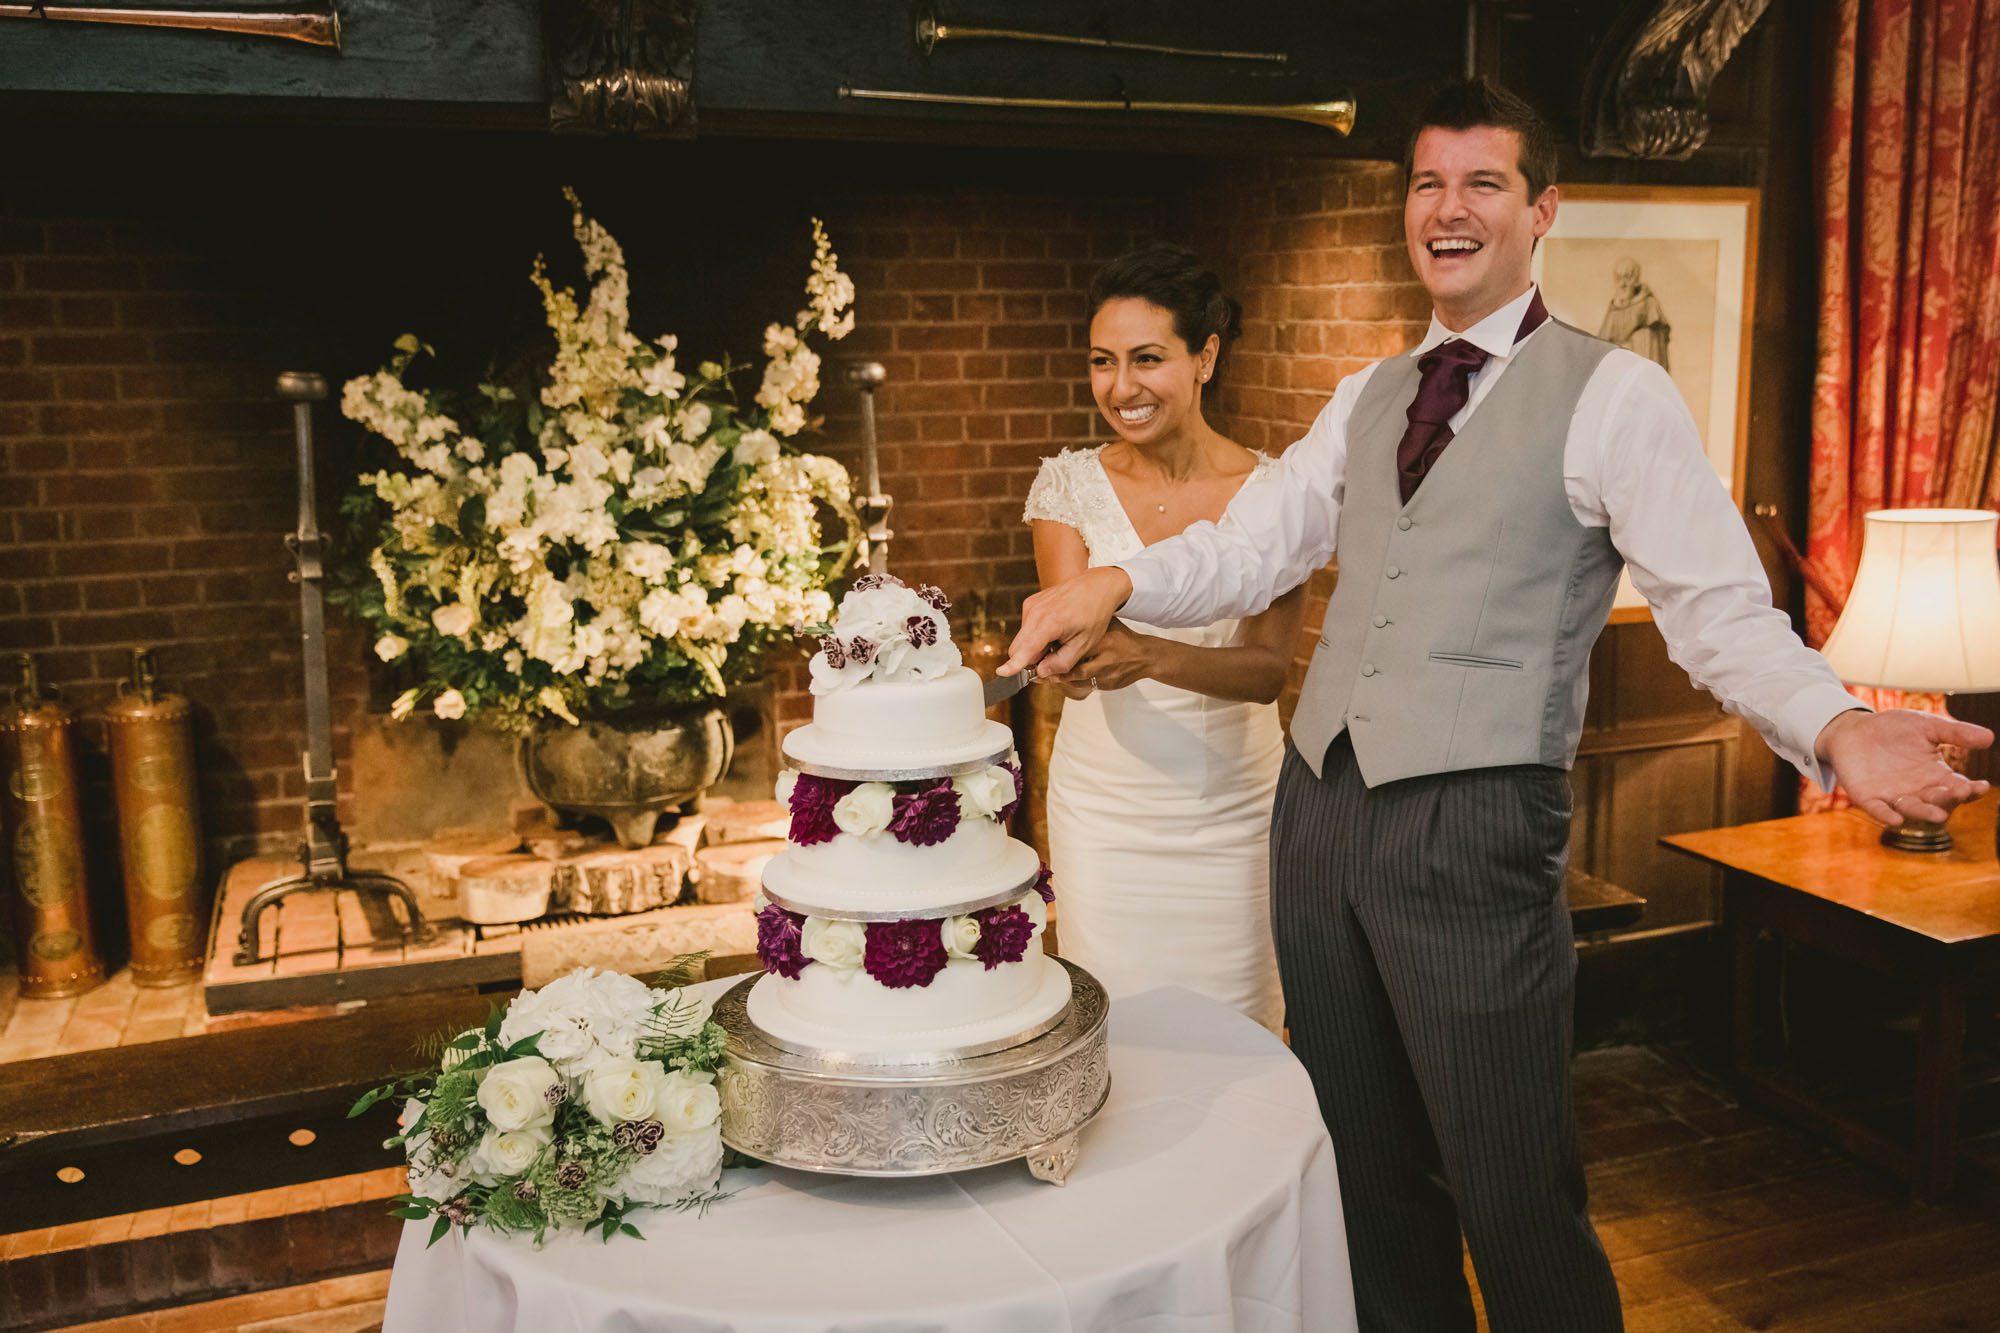 Bride and Groom cut the cake at Ramster hall.